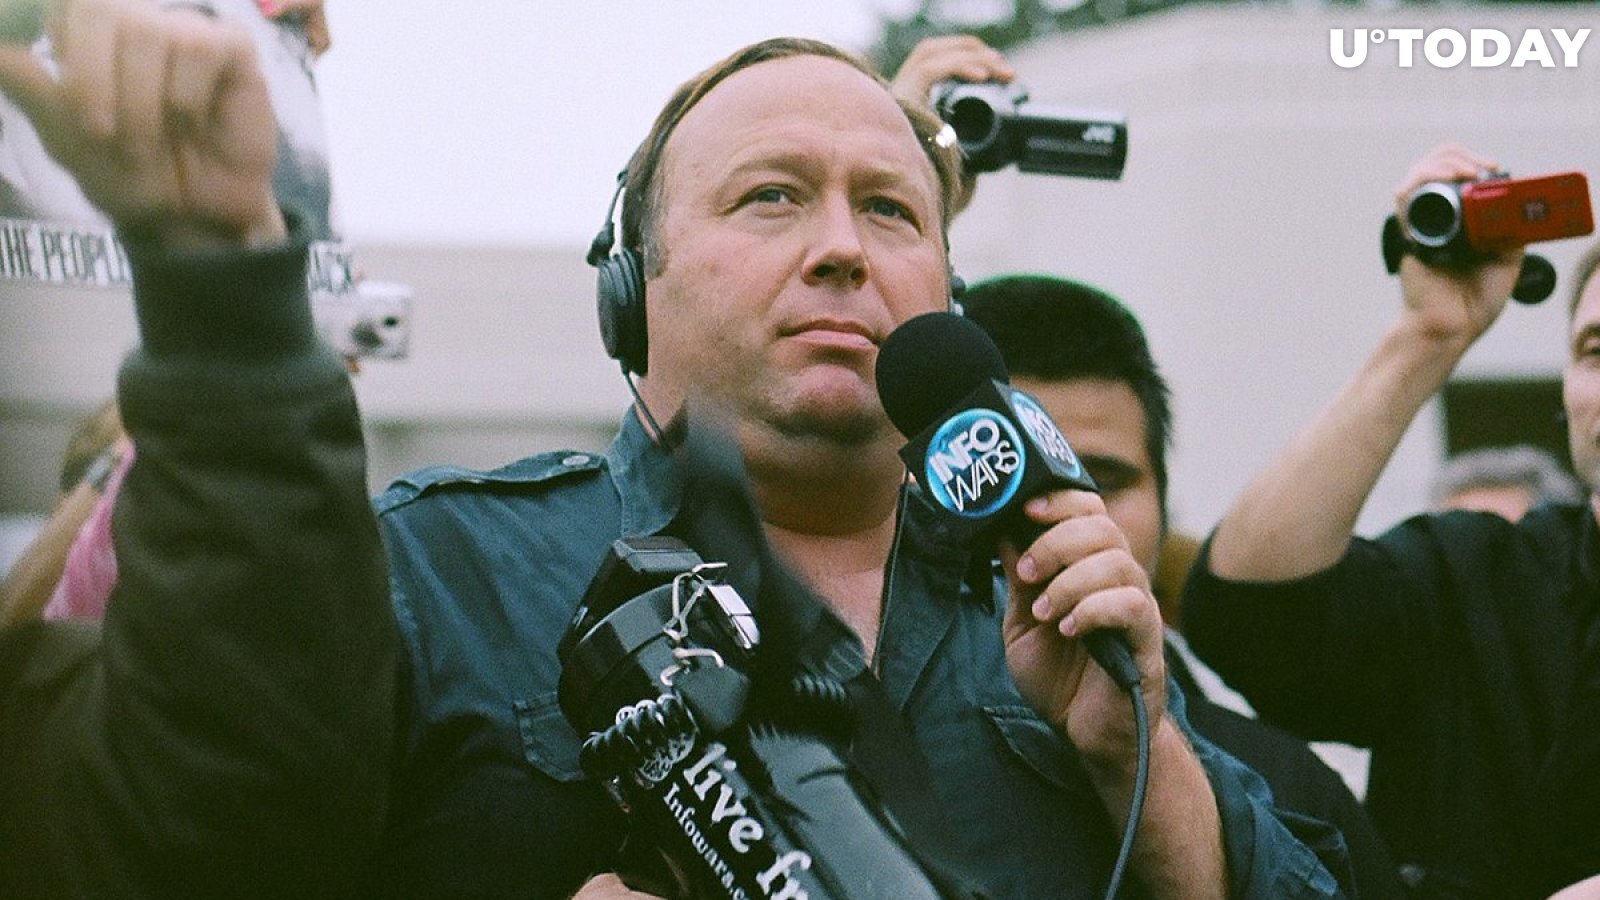 XRP Will Be Global Reserve Currency, Viewer Tells Conspiracy Theorist Alex Jones